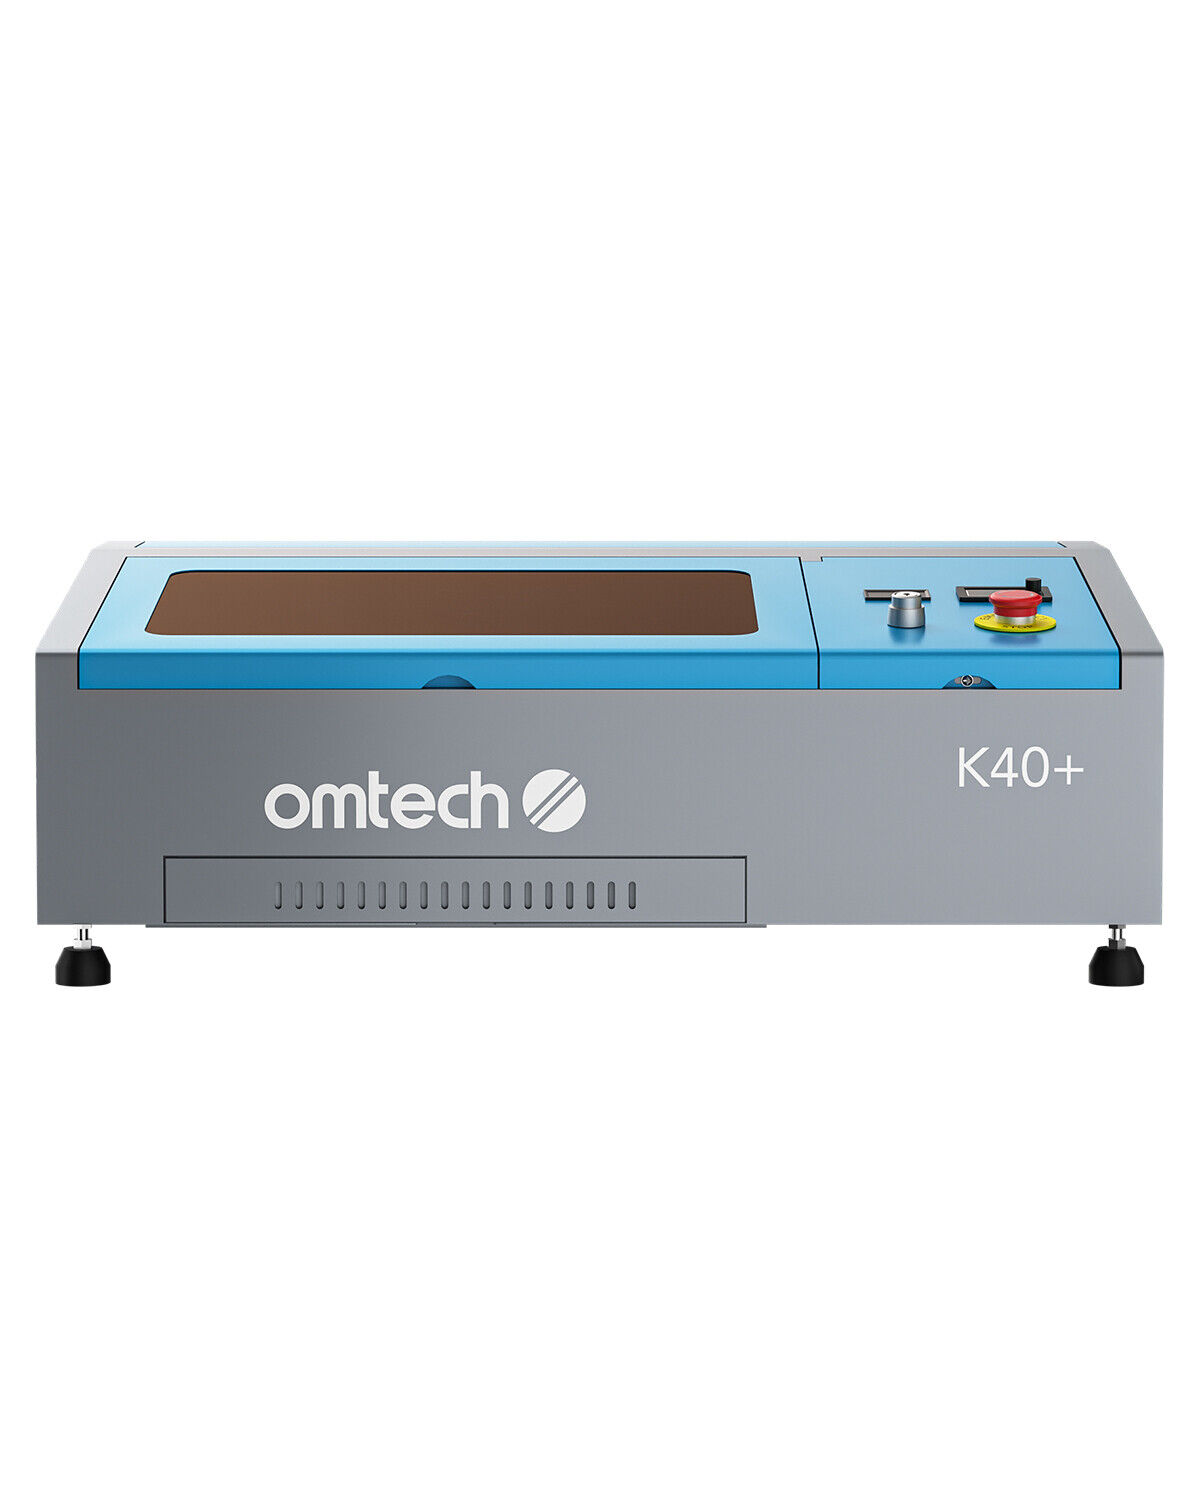 OMTech 40W K40+ CO2 Laser Engraving Machine 8x12 Inch Rotary Axis Compatible